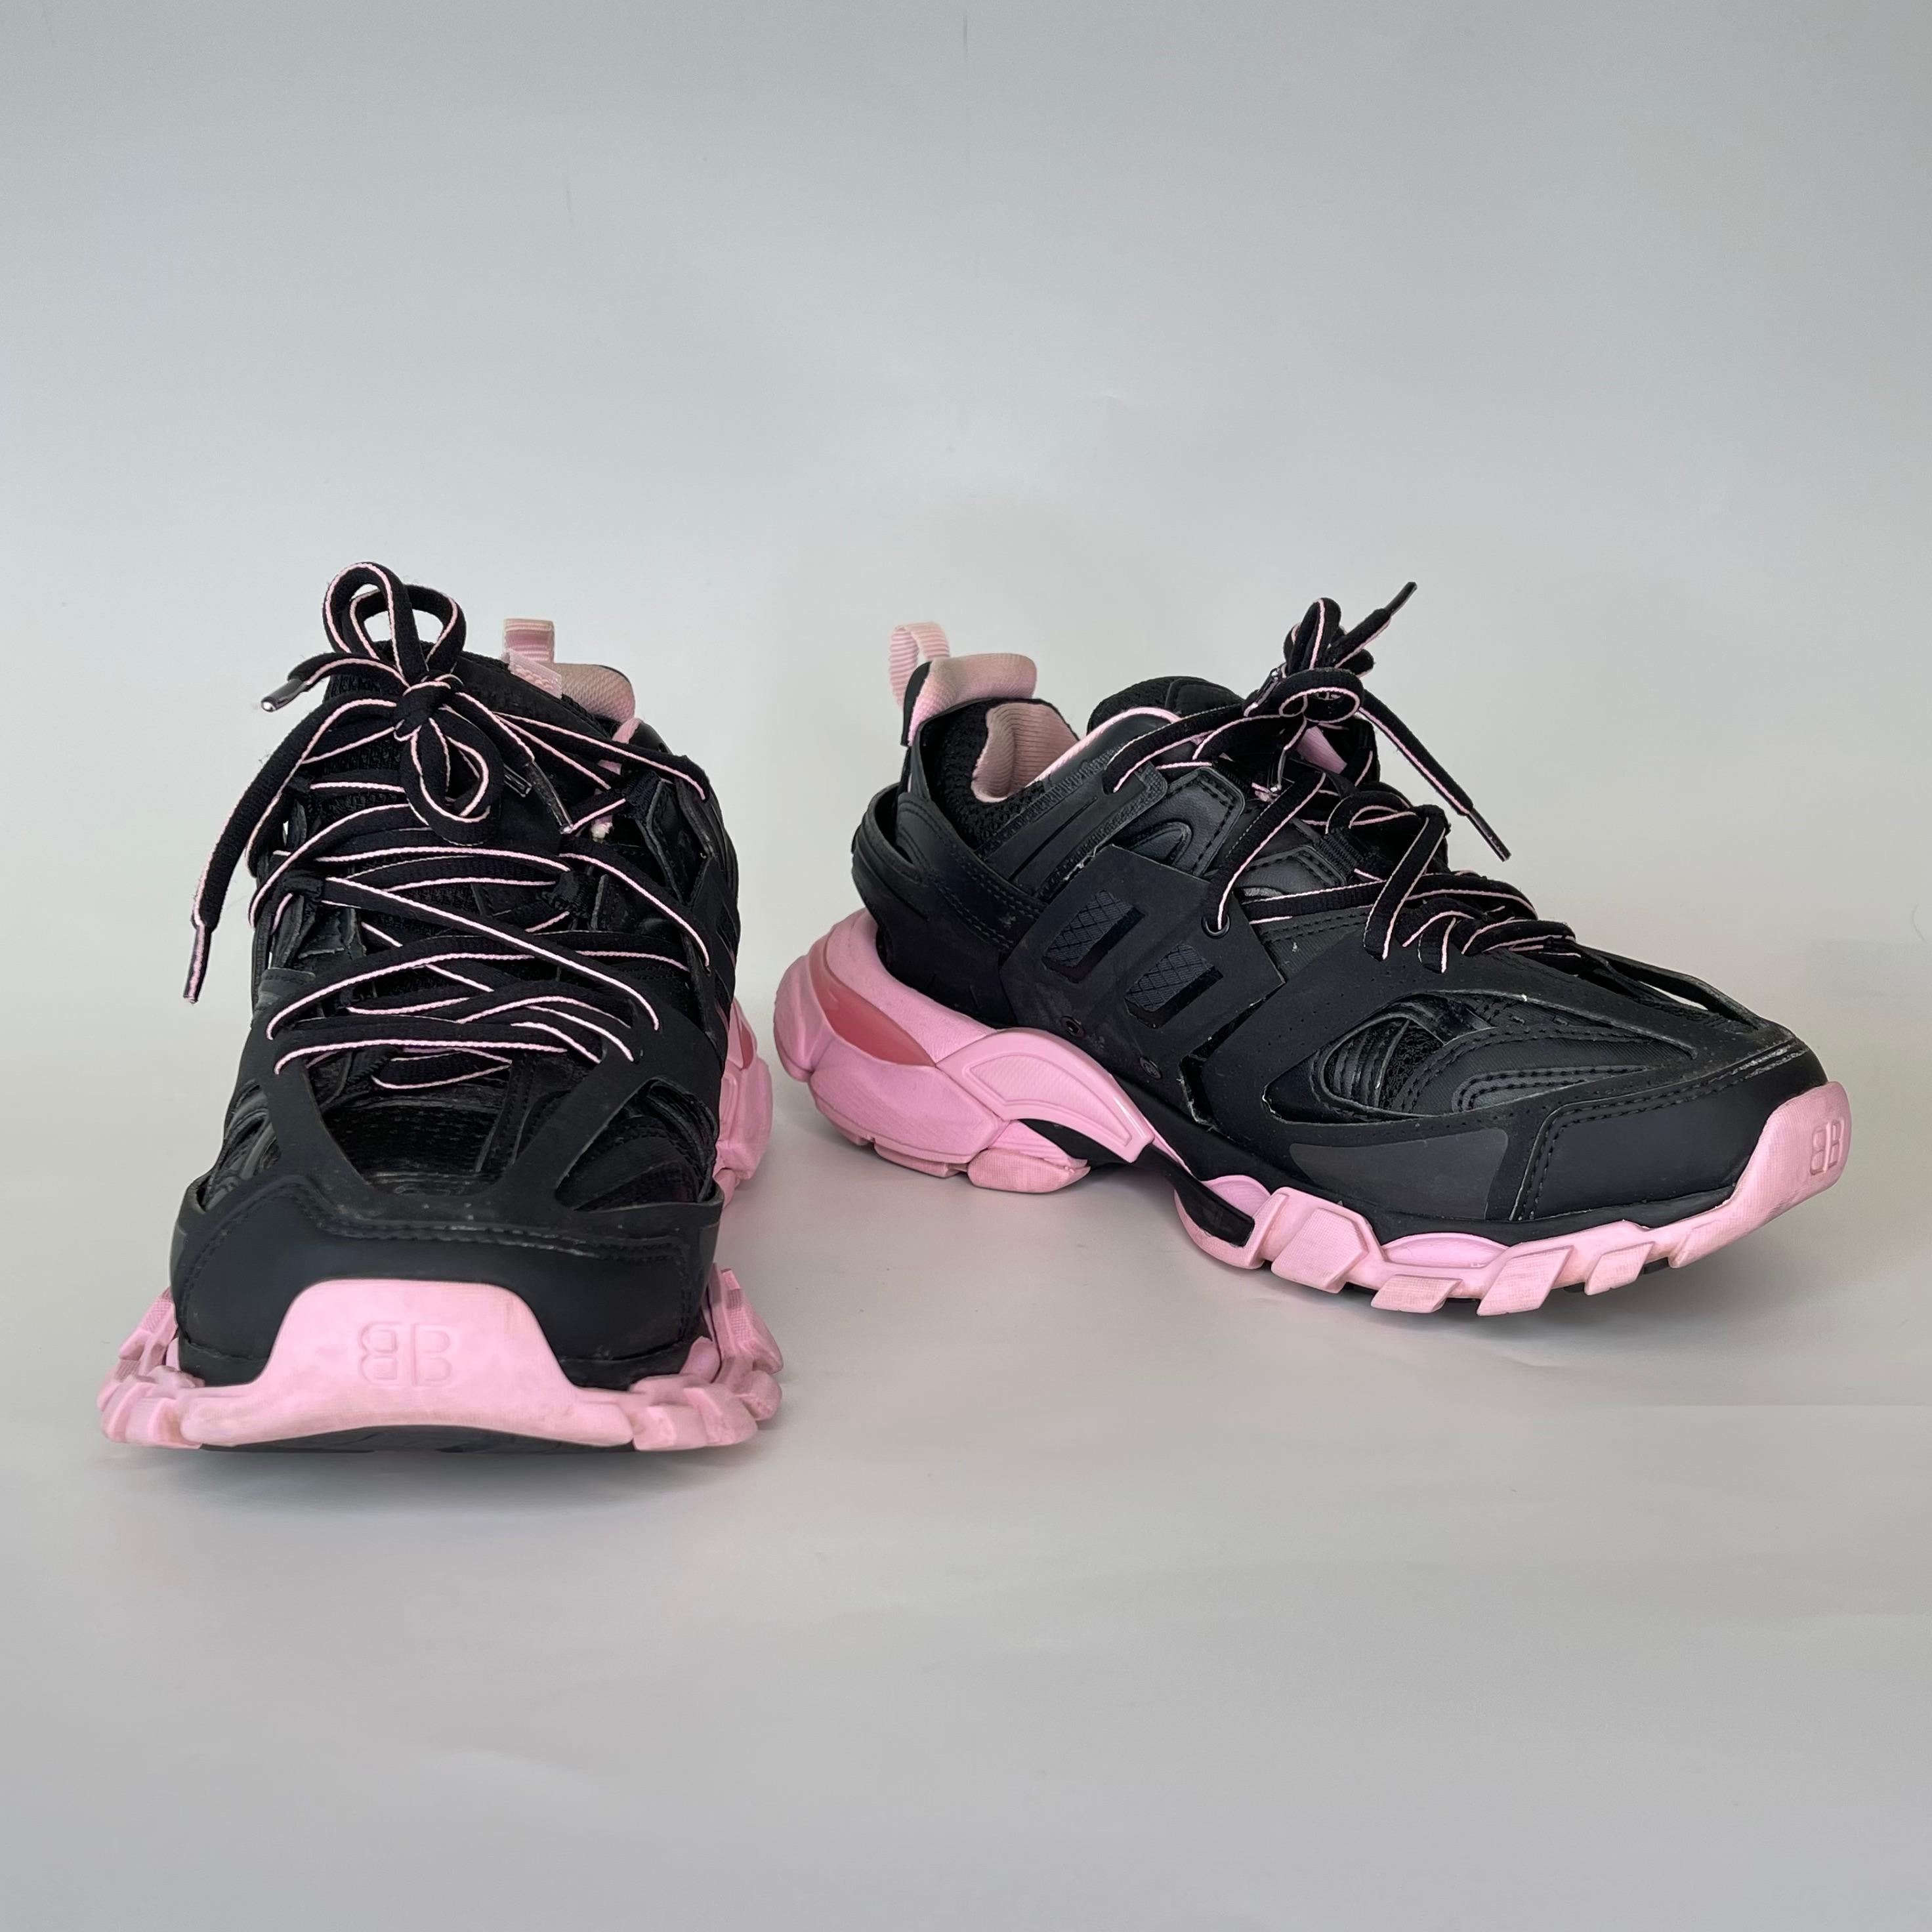 Featuring a black/pink color, mesh panelling, double pull-tab at the opening, logo patch at the tongue, round toe front lace-up fastening and a chunky rubber sole.

COLOR: Black/Pink
MATERIAL: Ruber sole and fabric uppers
ITEM CODE: 542436
SIZE: 7